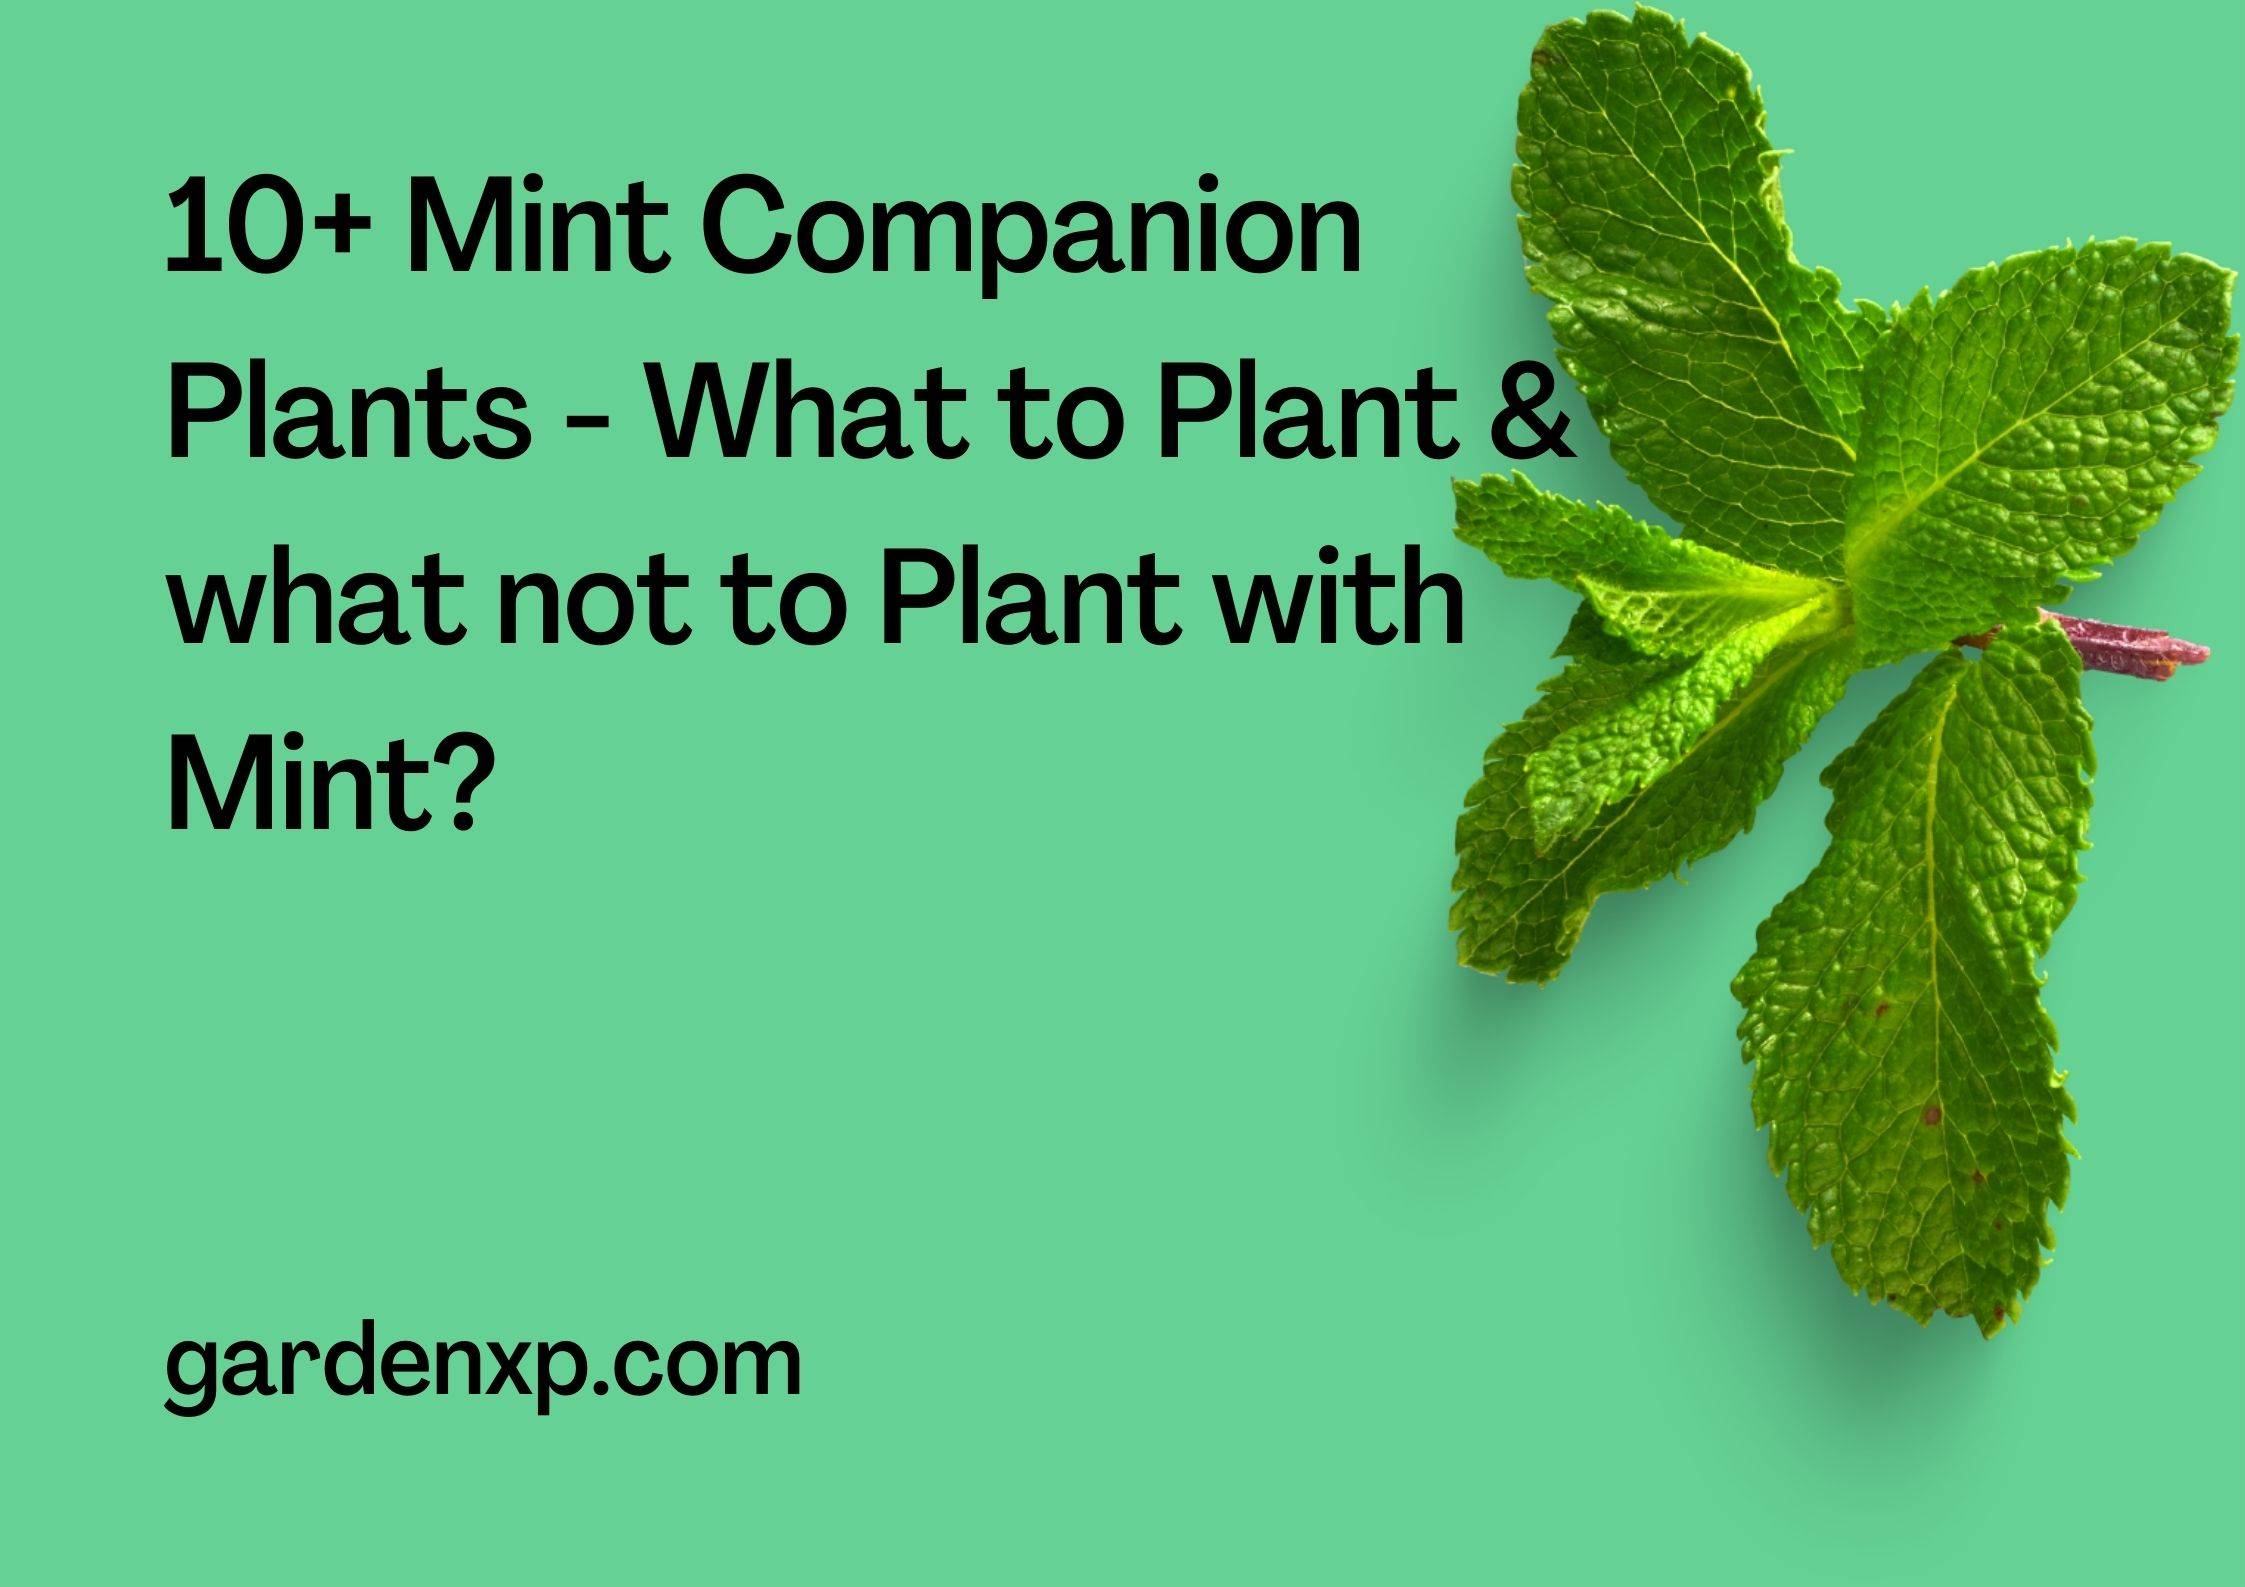 10+ Mint Companion Plants - What to Plant & what not to Plant with Mint?  